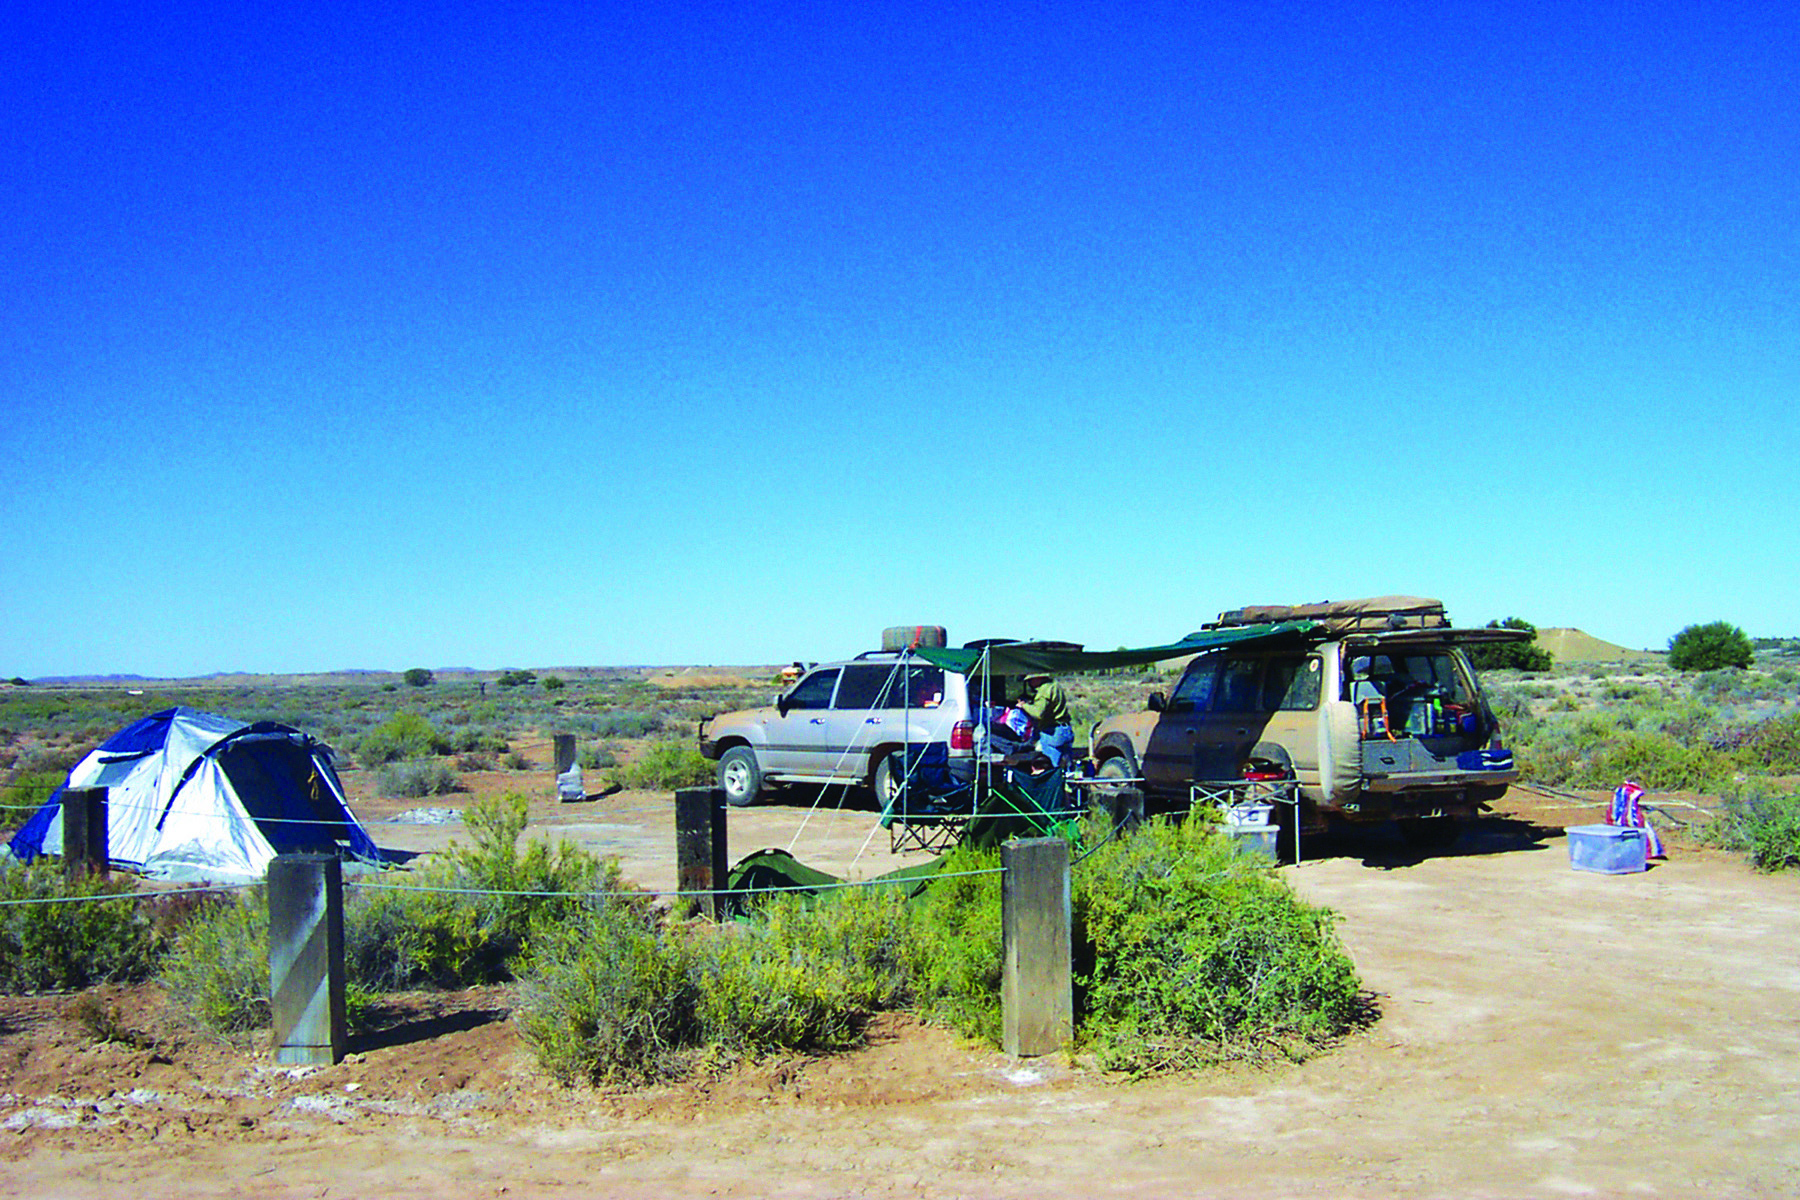 A setup in the outback of two cars, a tent and an awning on poles